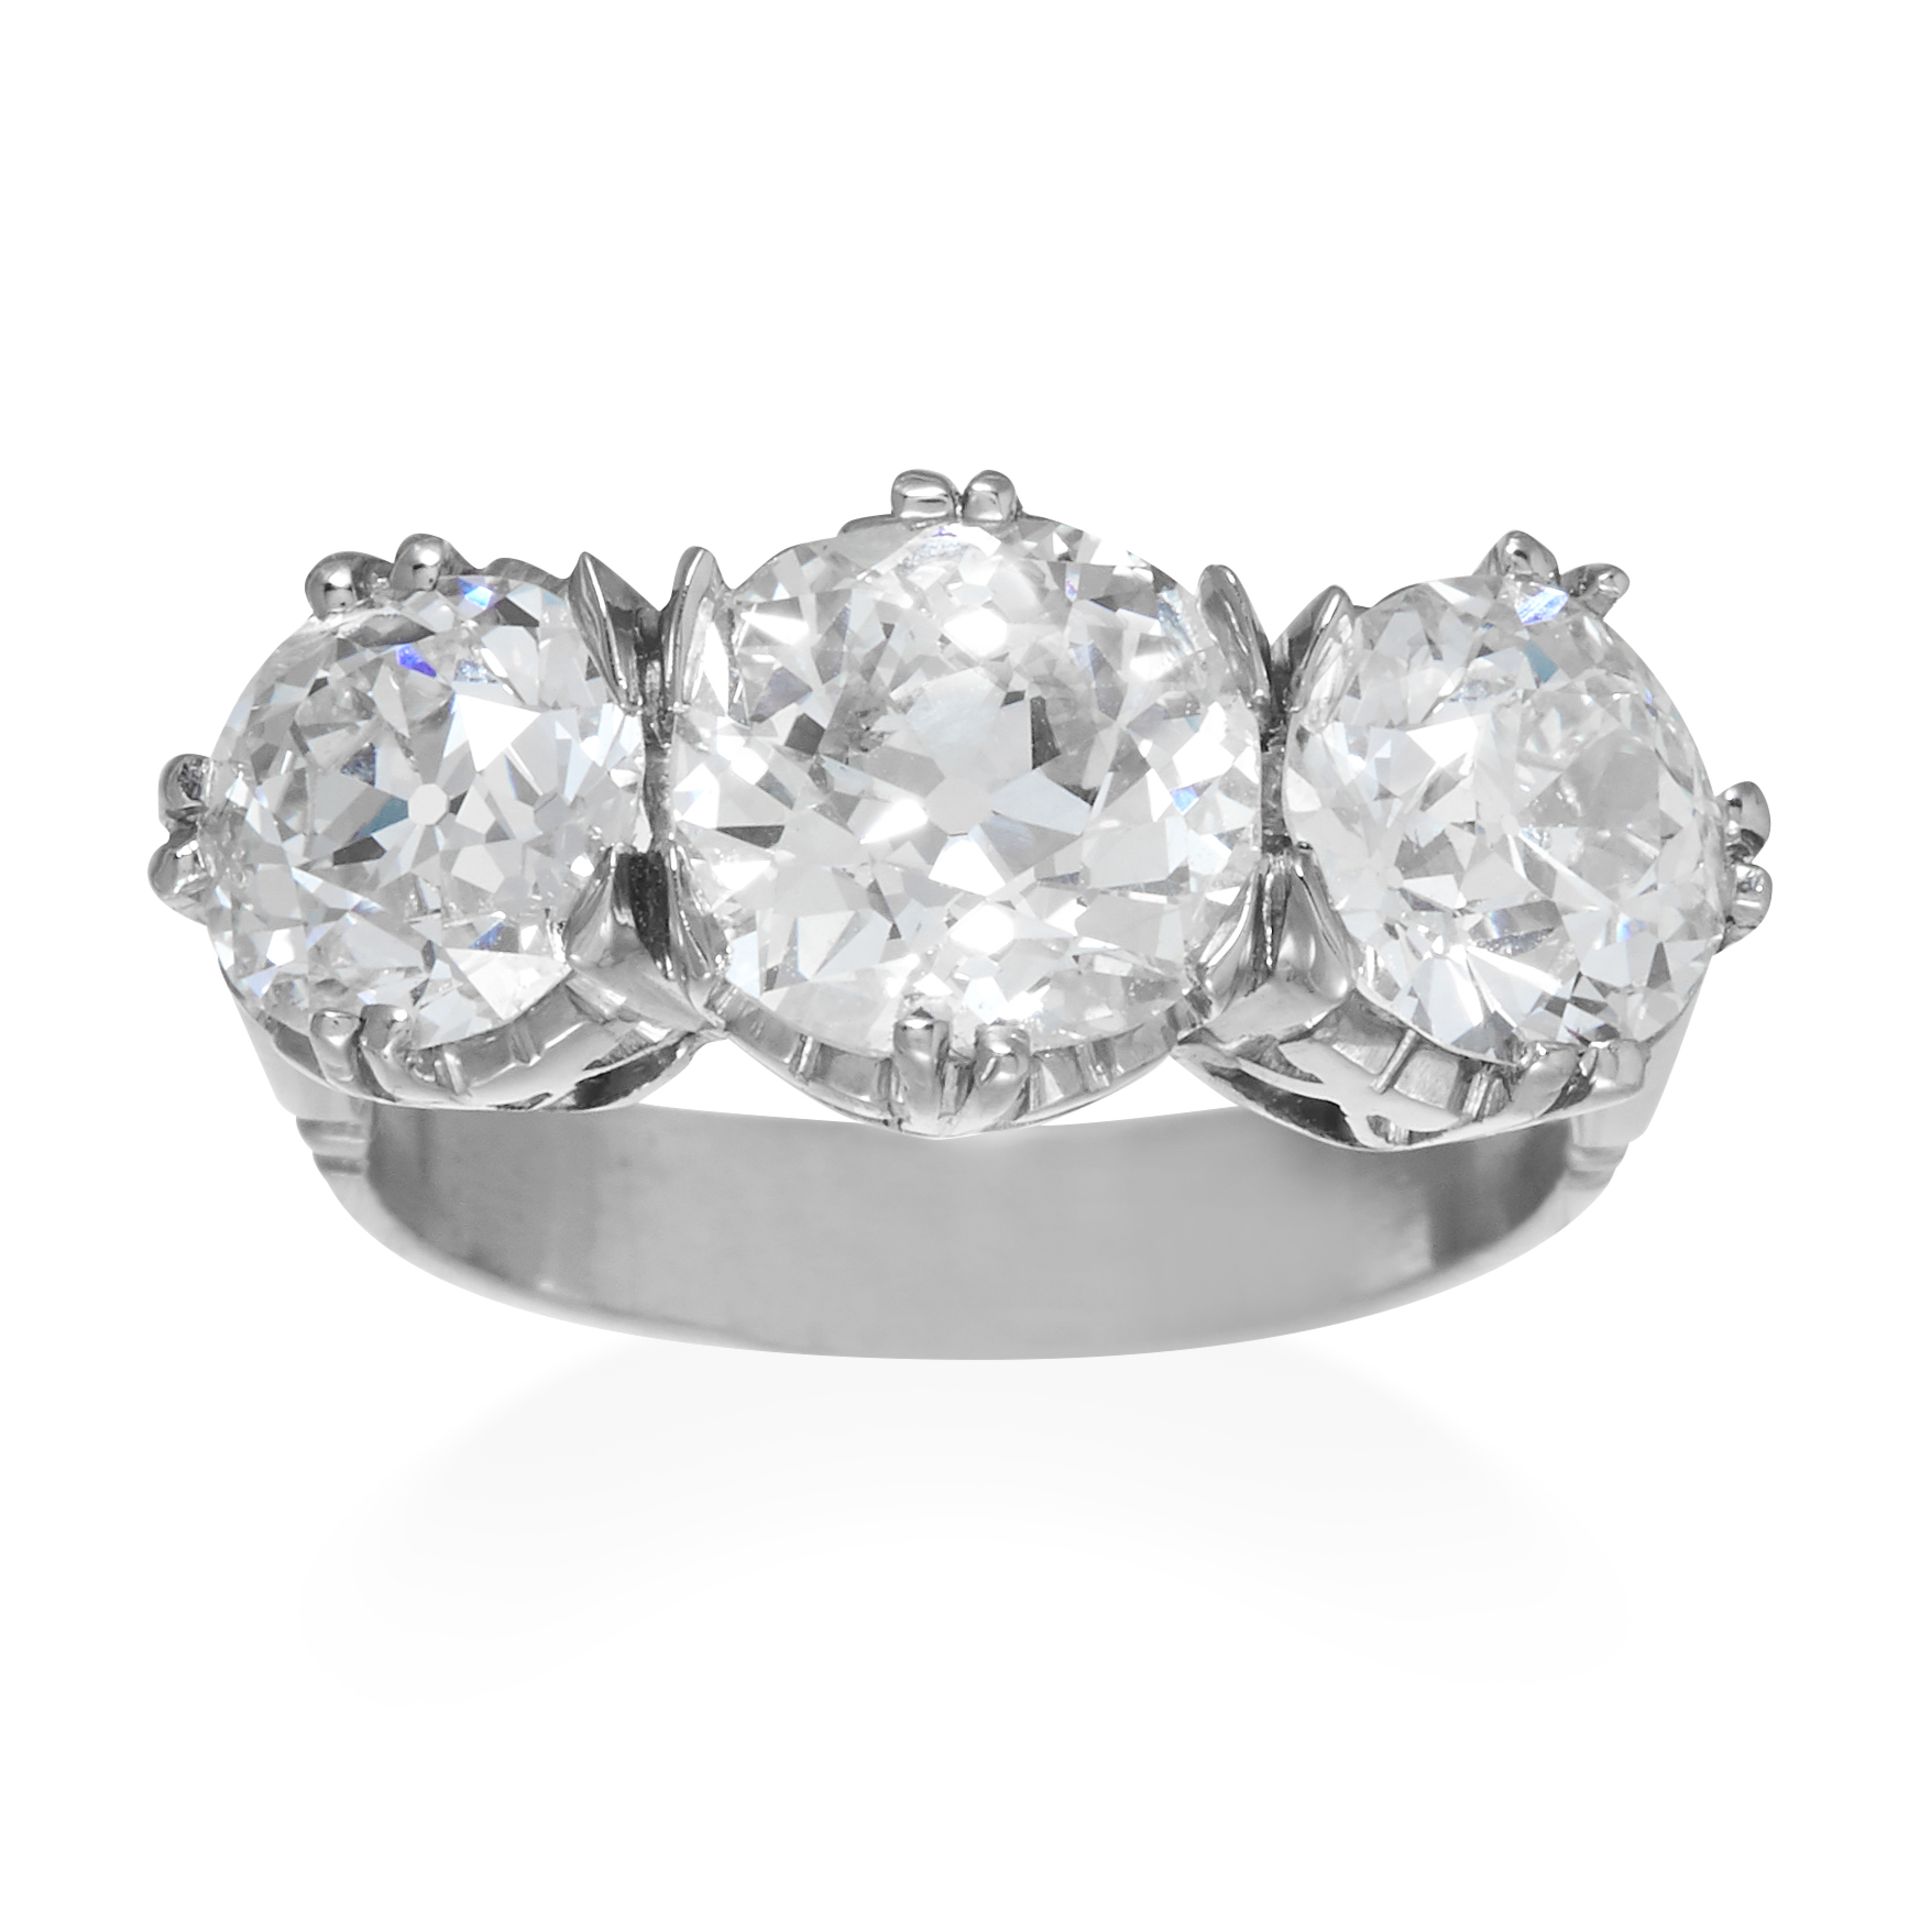 AN ANTIQUE 5.50 CARAT DIAMOND THREE STONE RING in platinum or white gold, set with three graduated